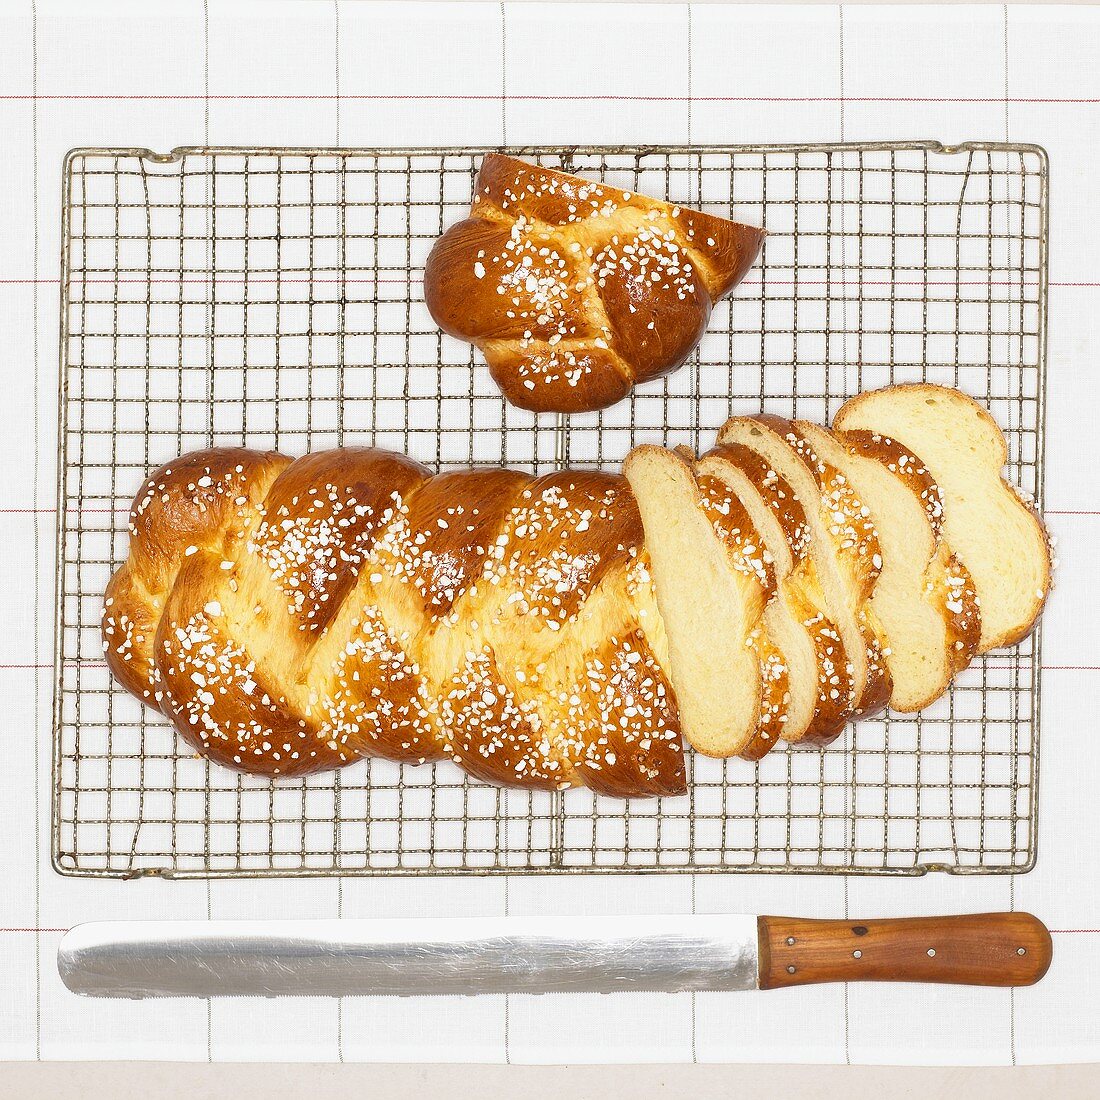 Bread plait with sugar, slices cut, on cake rack